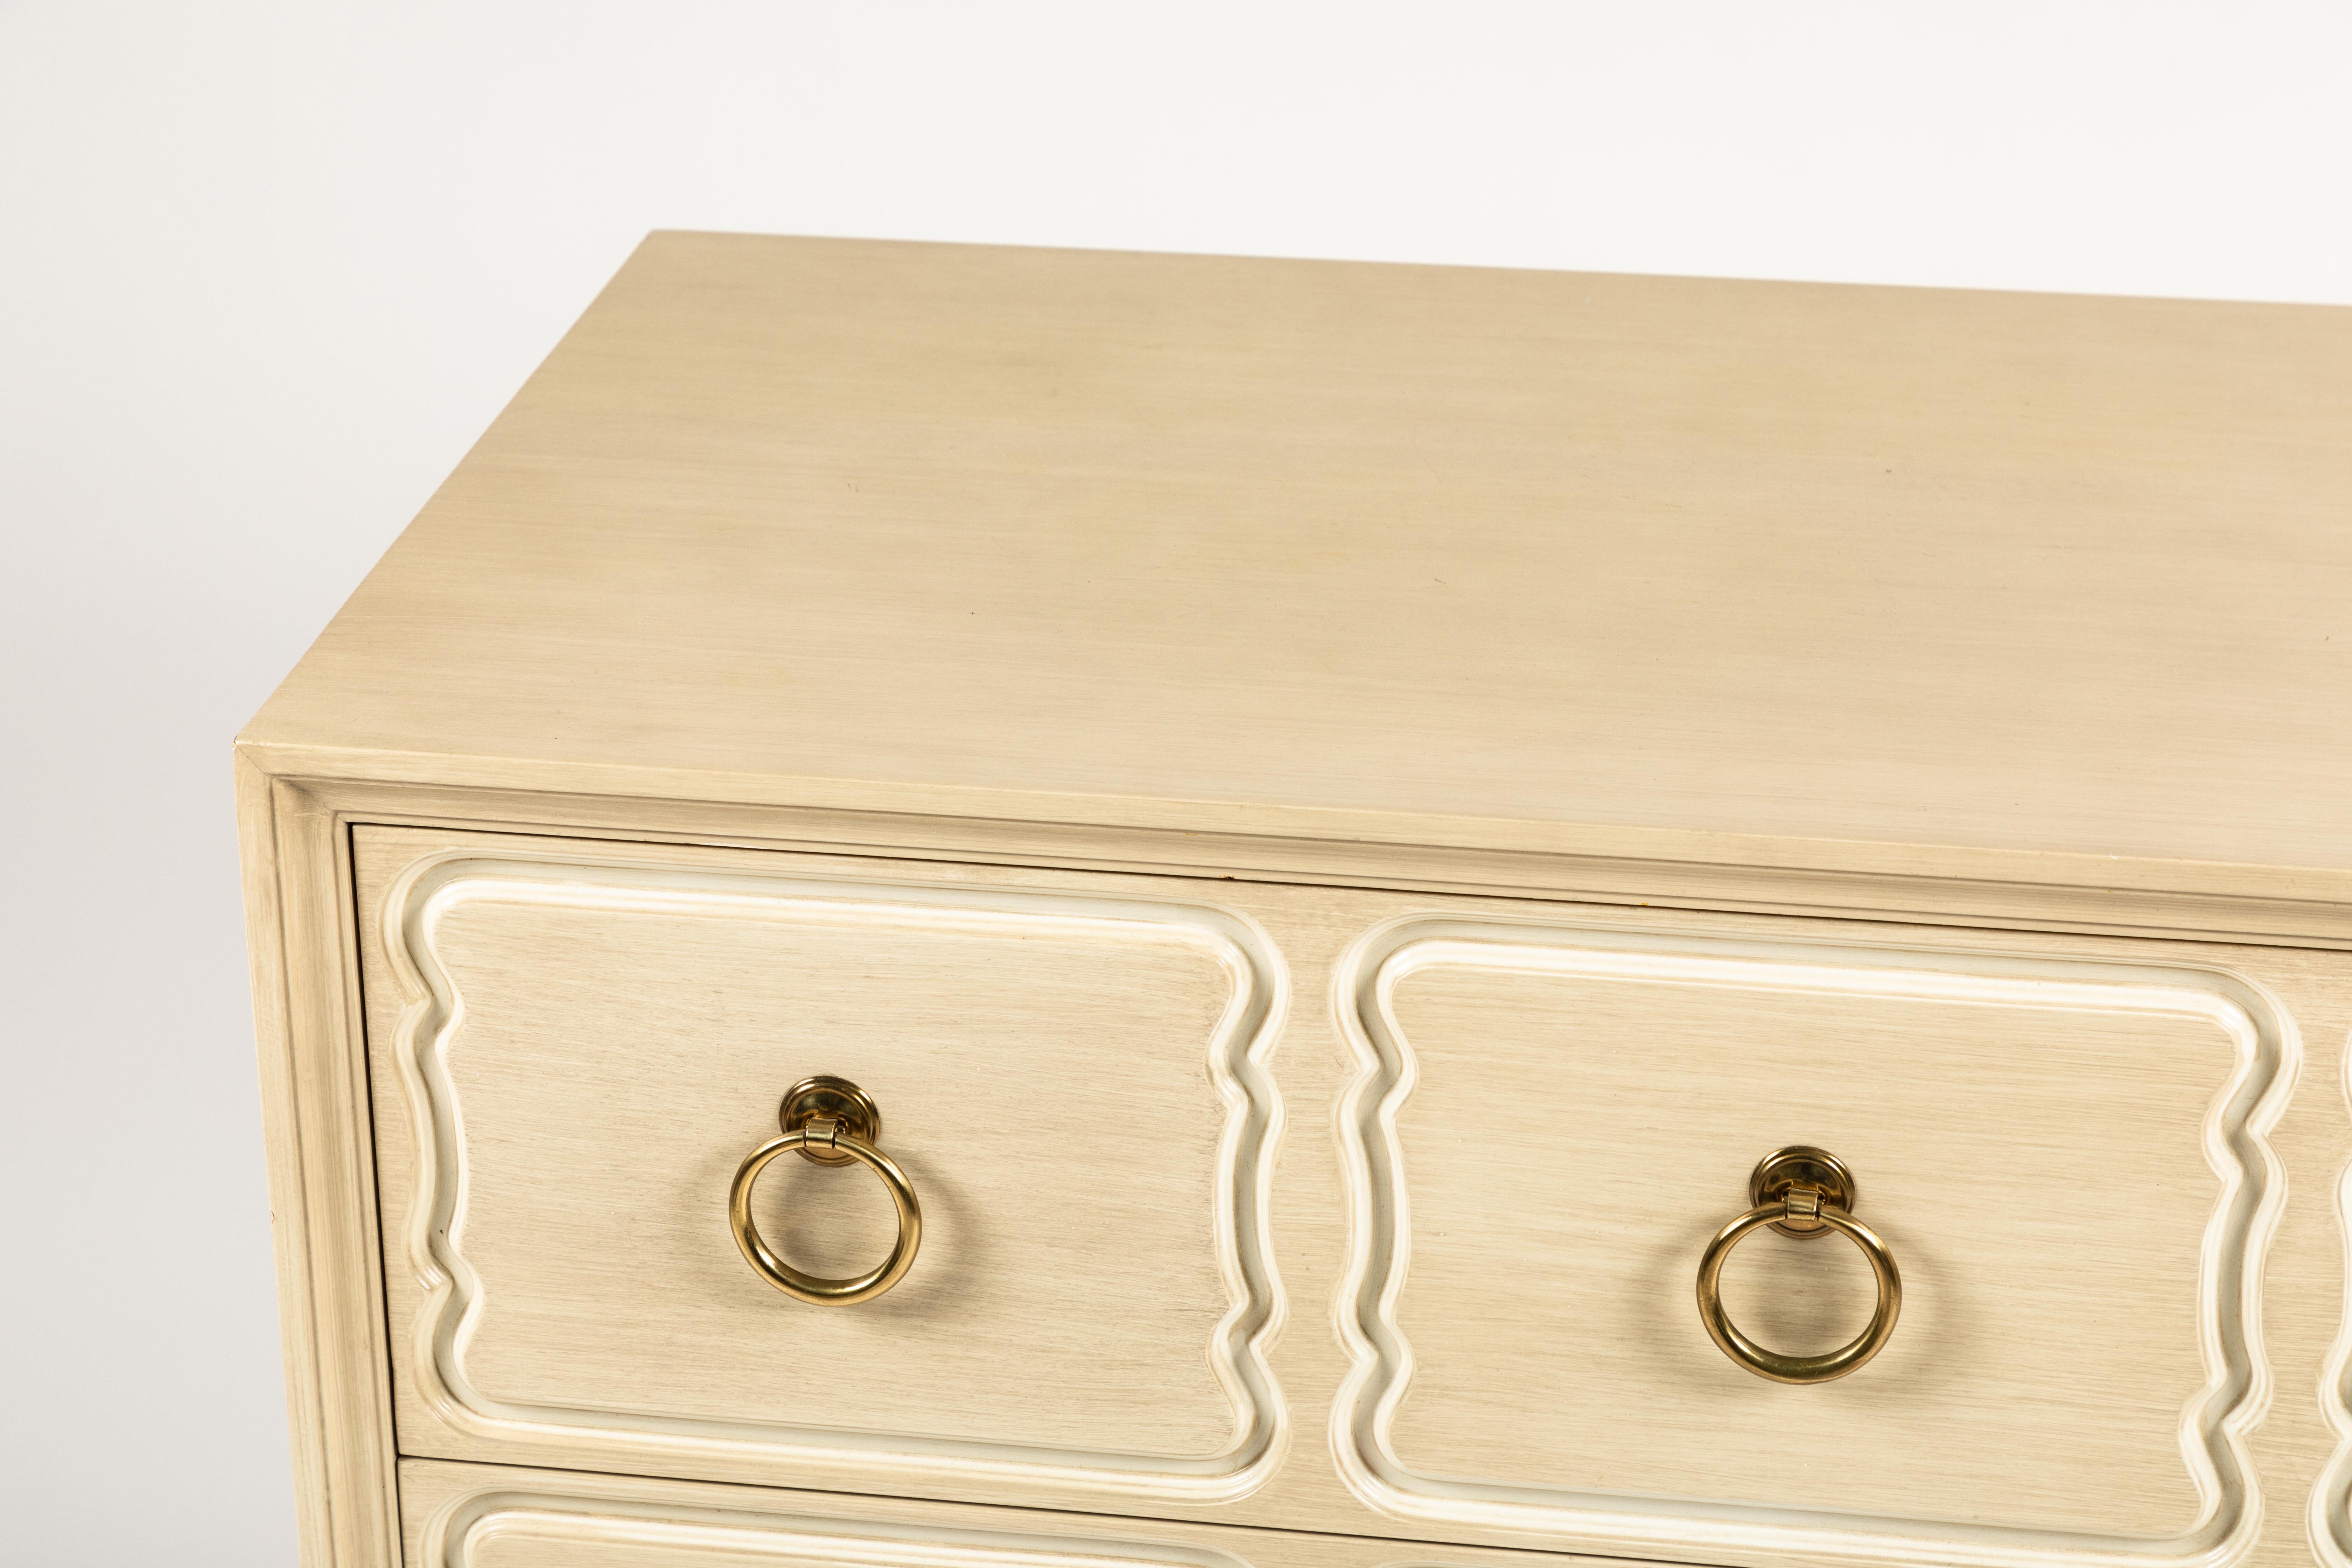 Bleached Pair of Dorothy Draper España Chests